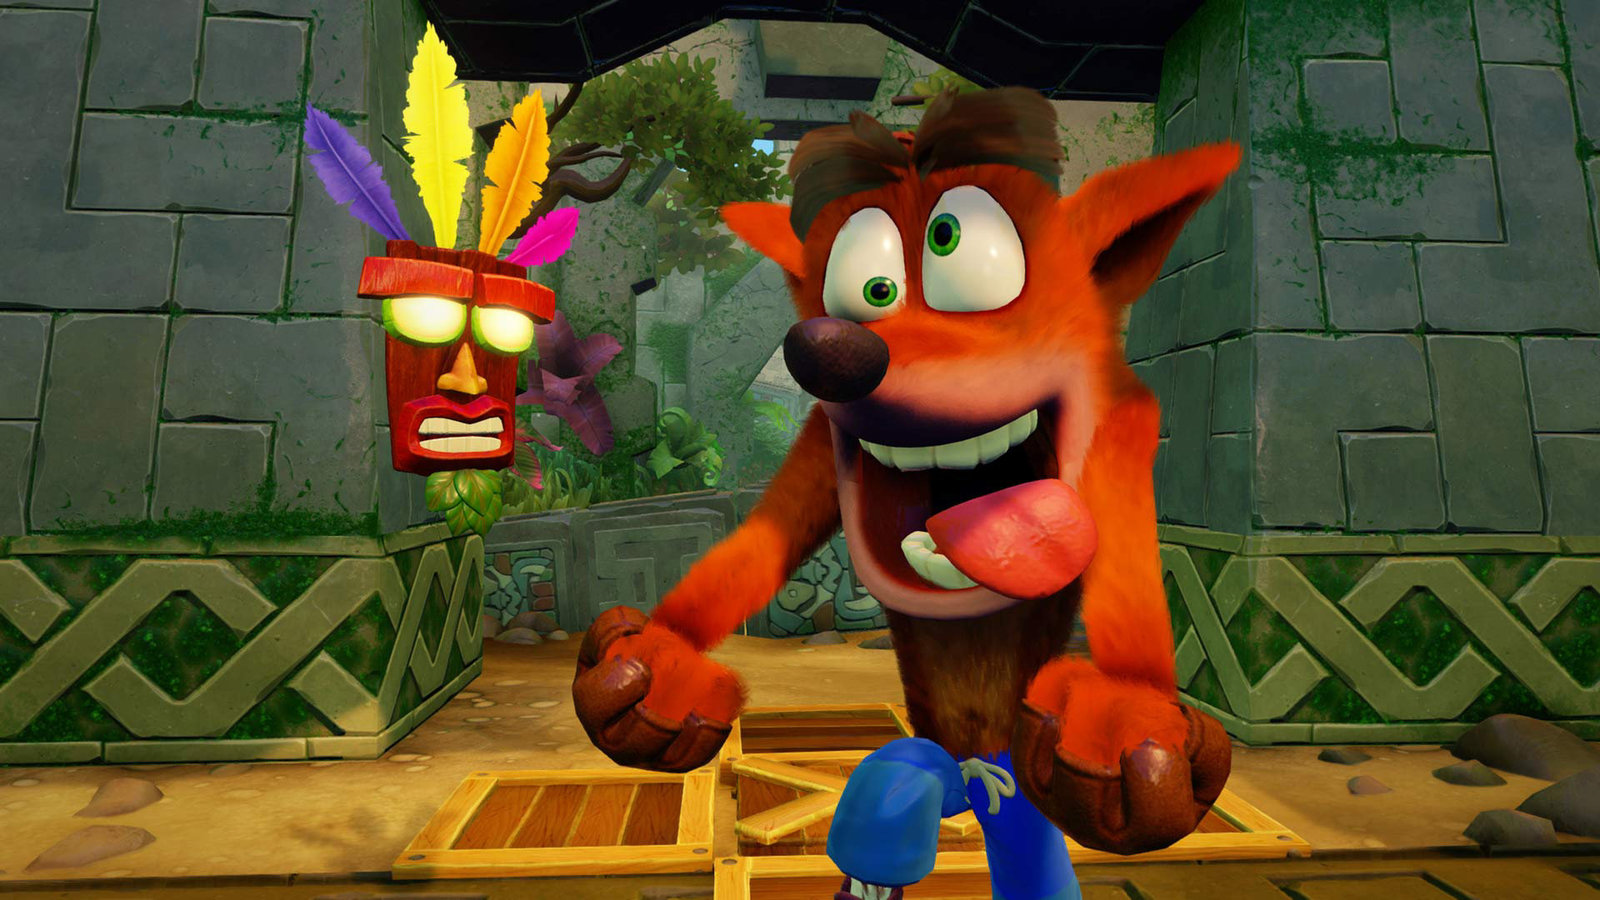 Rumor: We Could Be Seeing A New Crash Bandicoot Video Game In 2019